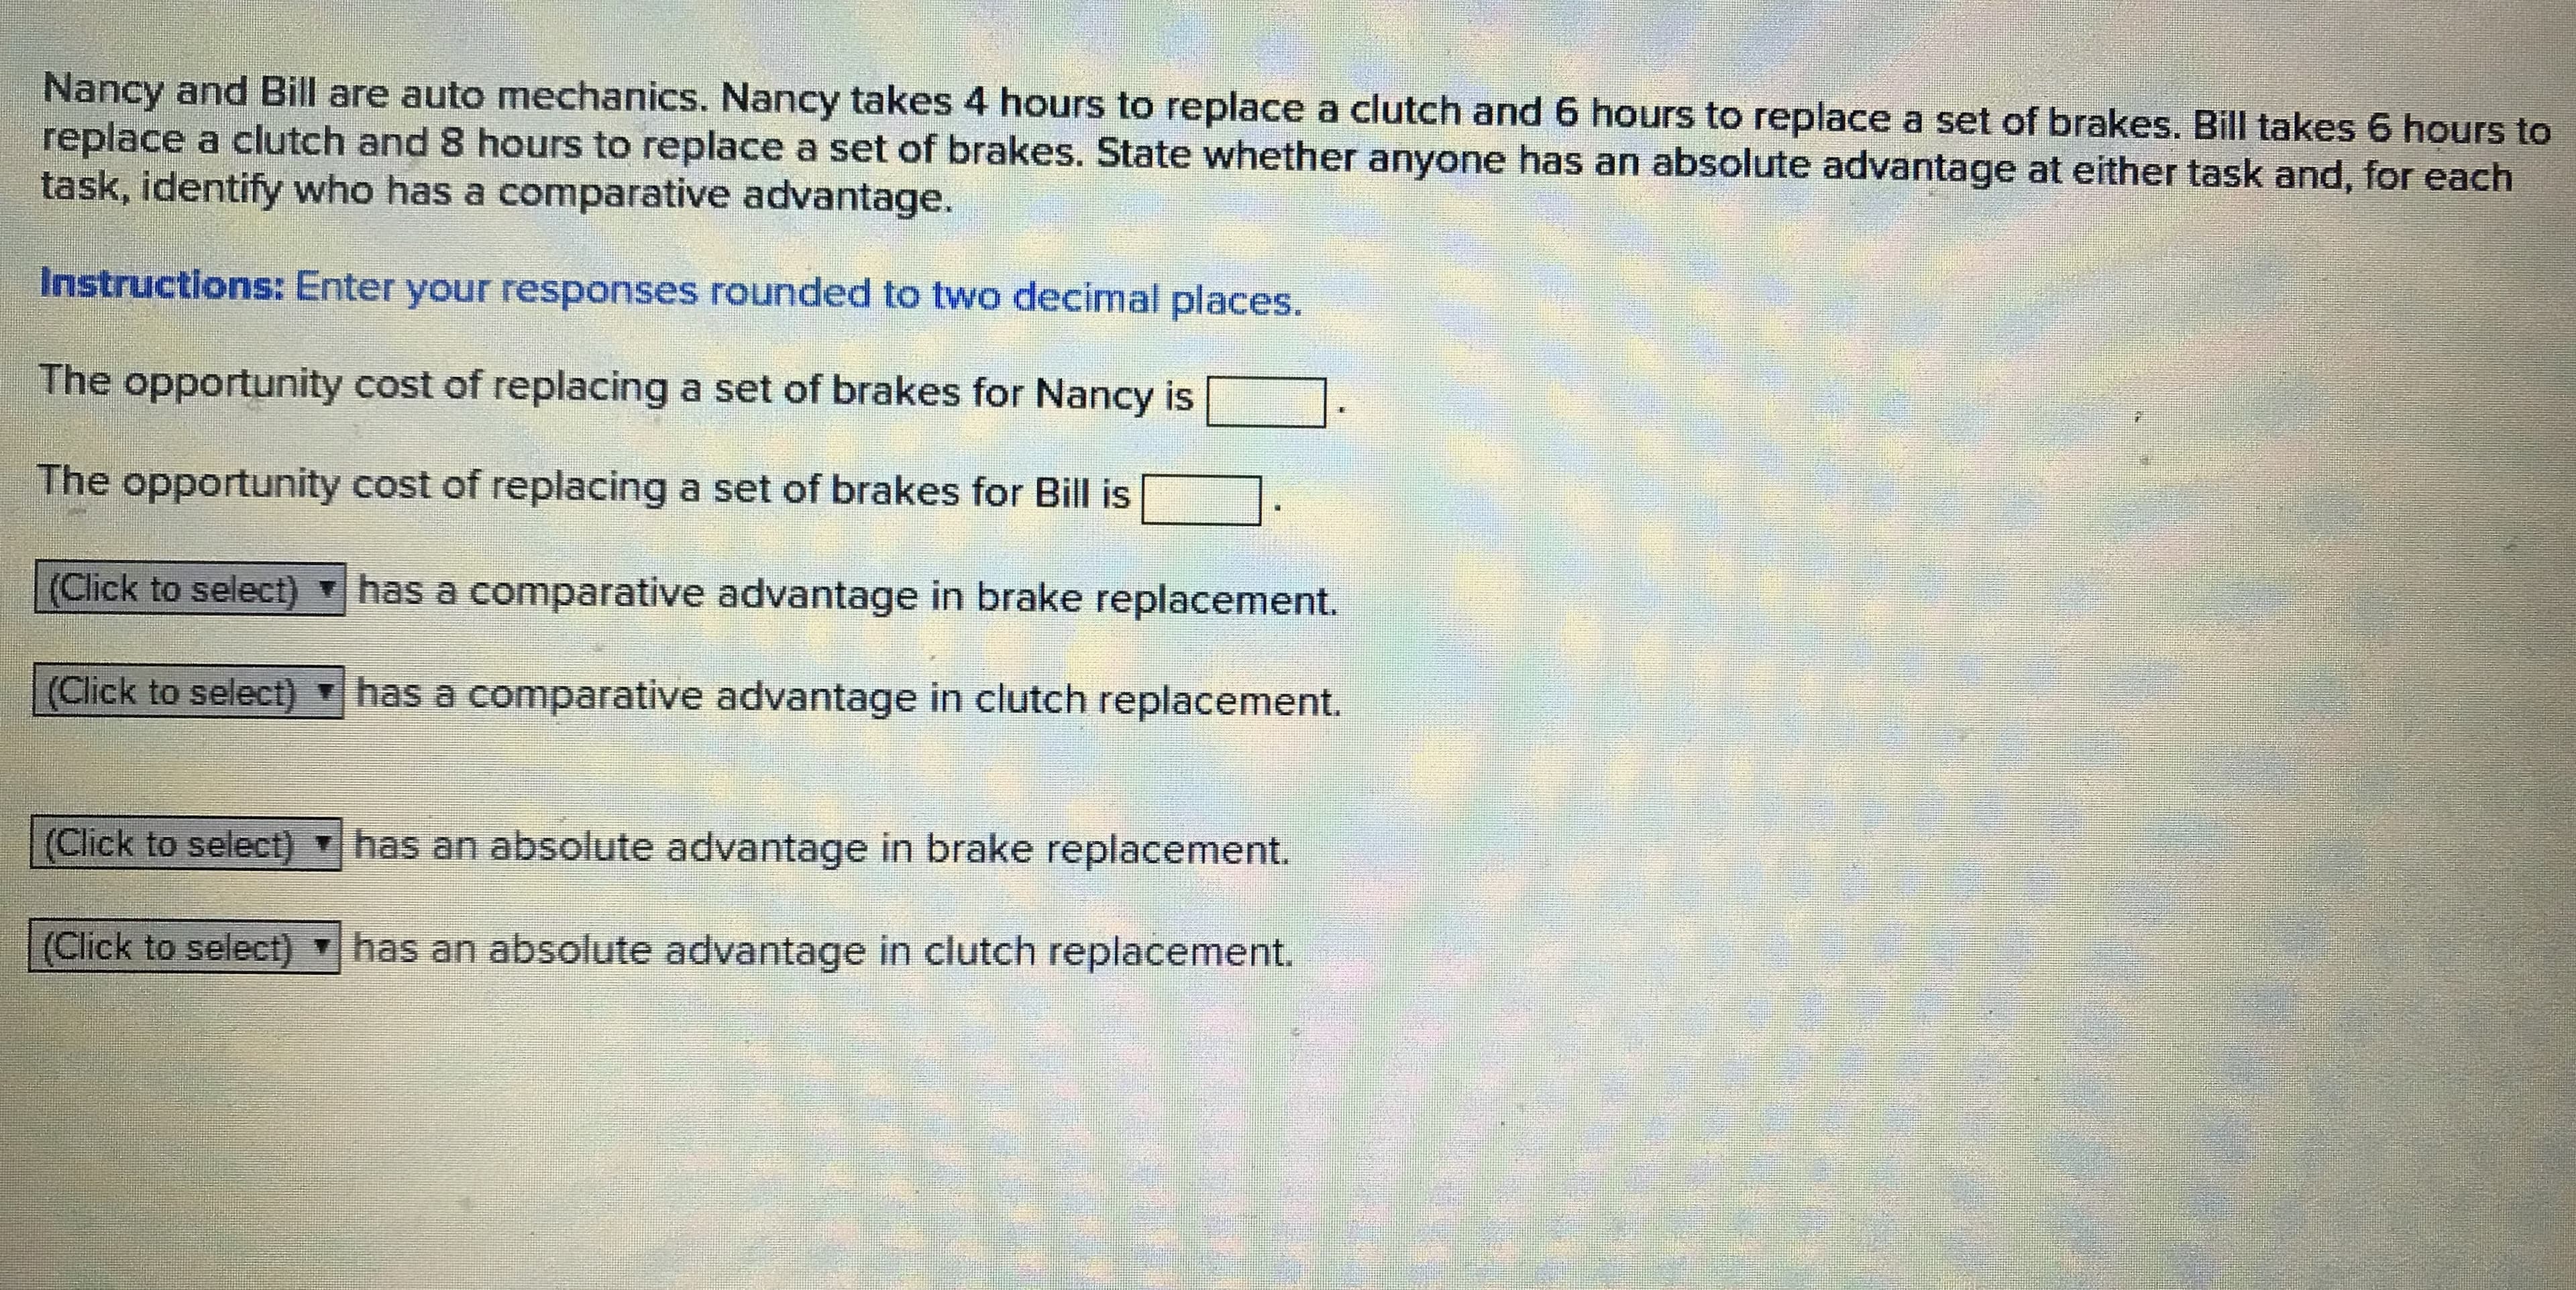 Nancy and Bill are auto mechanics. Nancy takes 4 hours to replace a clutch and 6 hours to replace a set of brakes. Bill takes 6 hours to
replace a clutch and 8 hours to replace a set of brakes. State whether anyone has an absolute advantage at either task and, for each
task, identify who has a comparative advantage.
Instructions: Enter your responses rounded to two decimal places.
The opportunity cost of replacing a set of brakes for Nancy is
The opportunity cost of replacing a set of brakes for Bill is
(Click to select) has a comparative advantage in brake replacement.
(Click to select)
has a comparative advantage in clutch replacement.
(Click to select) has an absolute advantage in brake replacement.
(Click to select) has an absolute advantage in clutch replacement.
